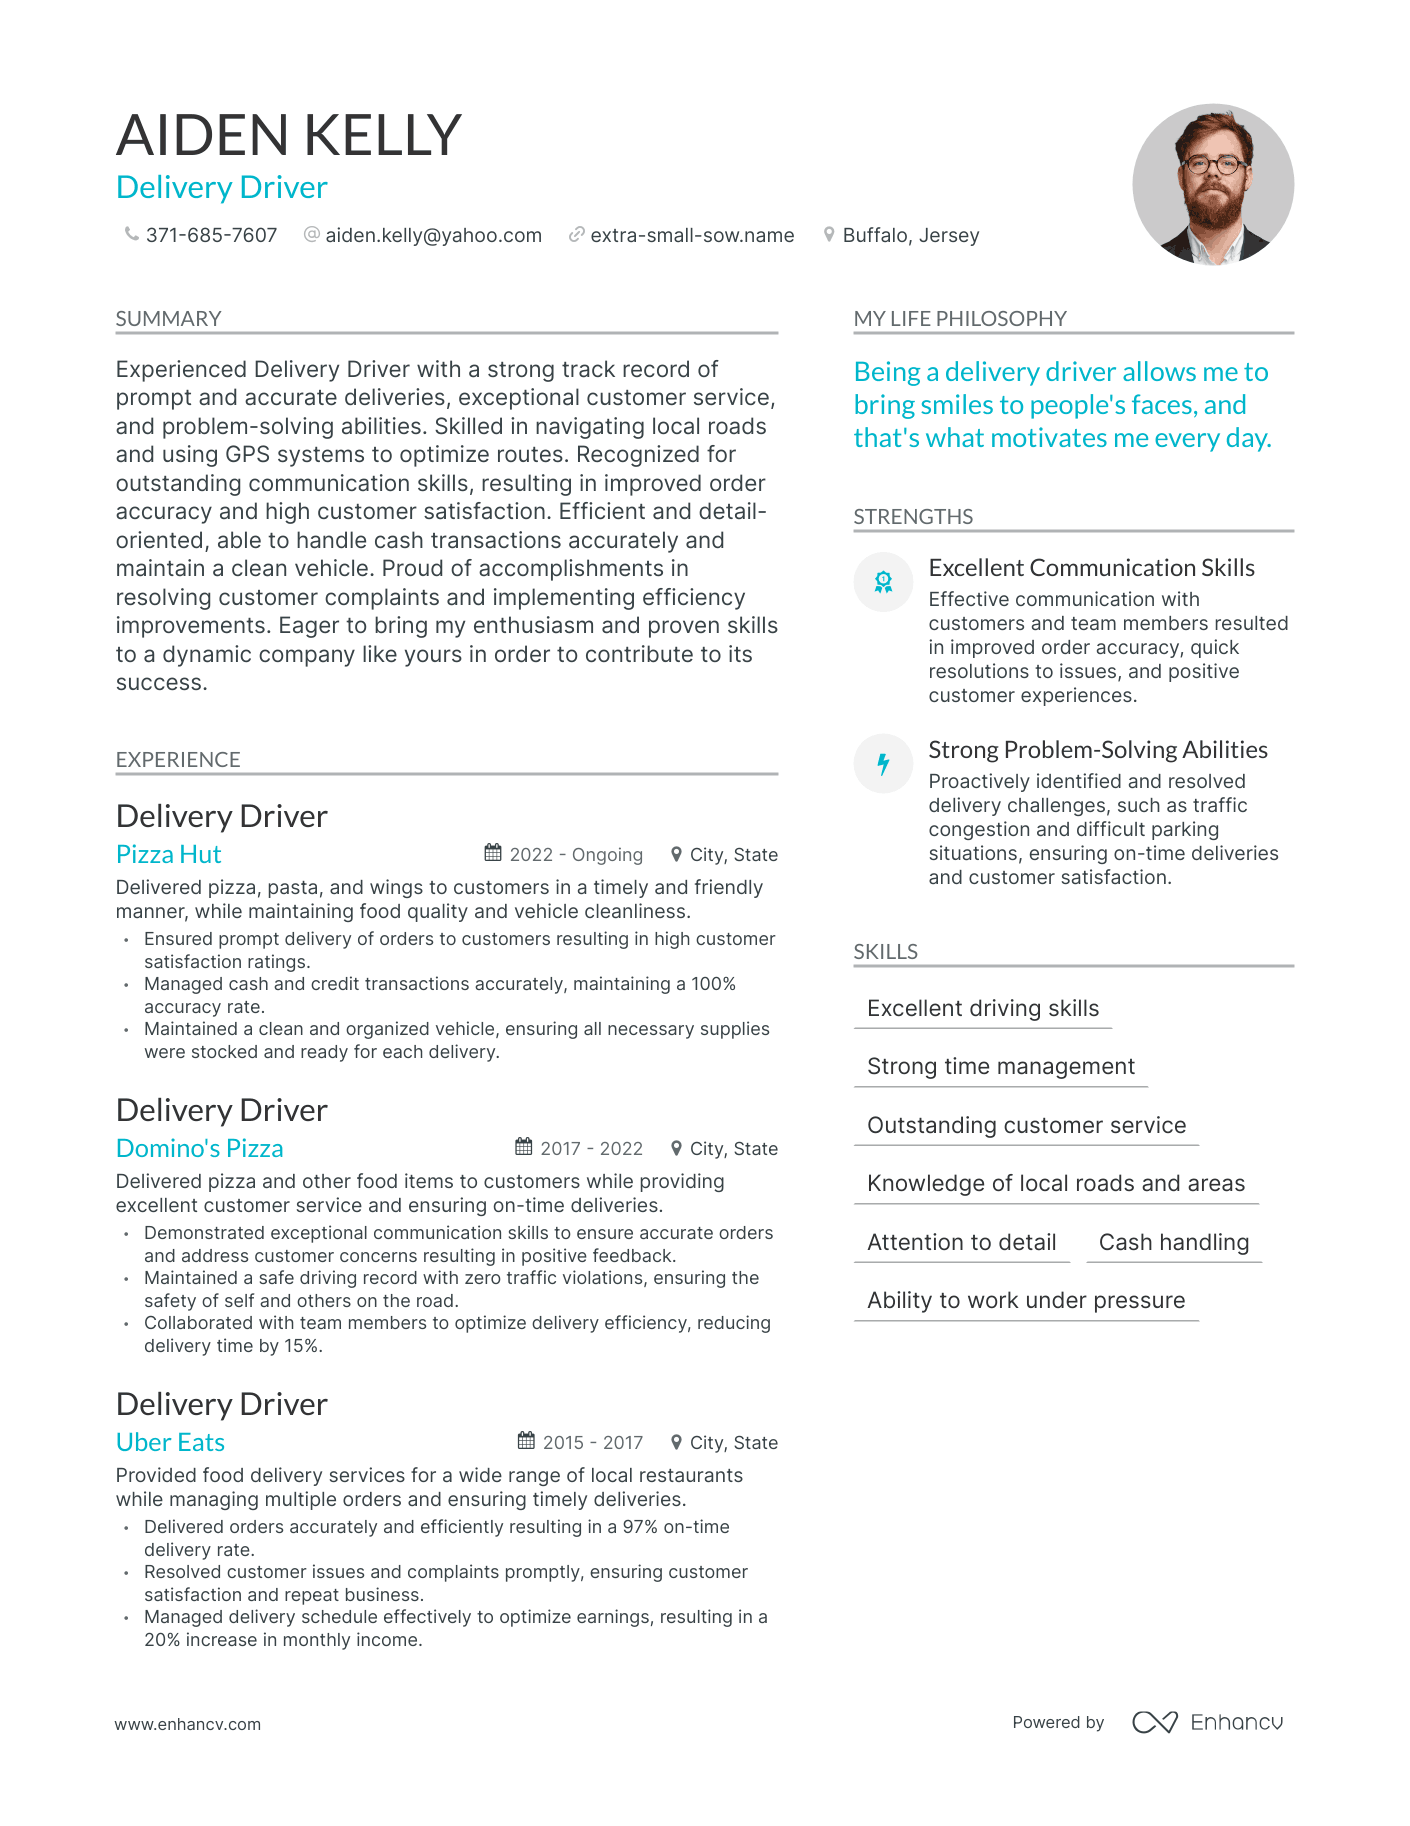 Delivery Driver resume example